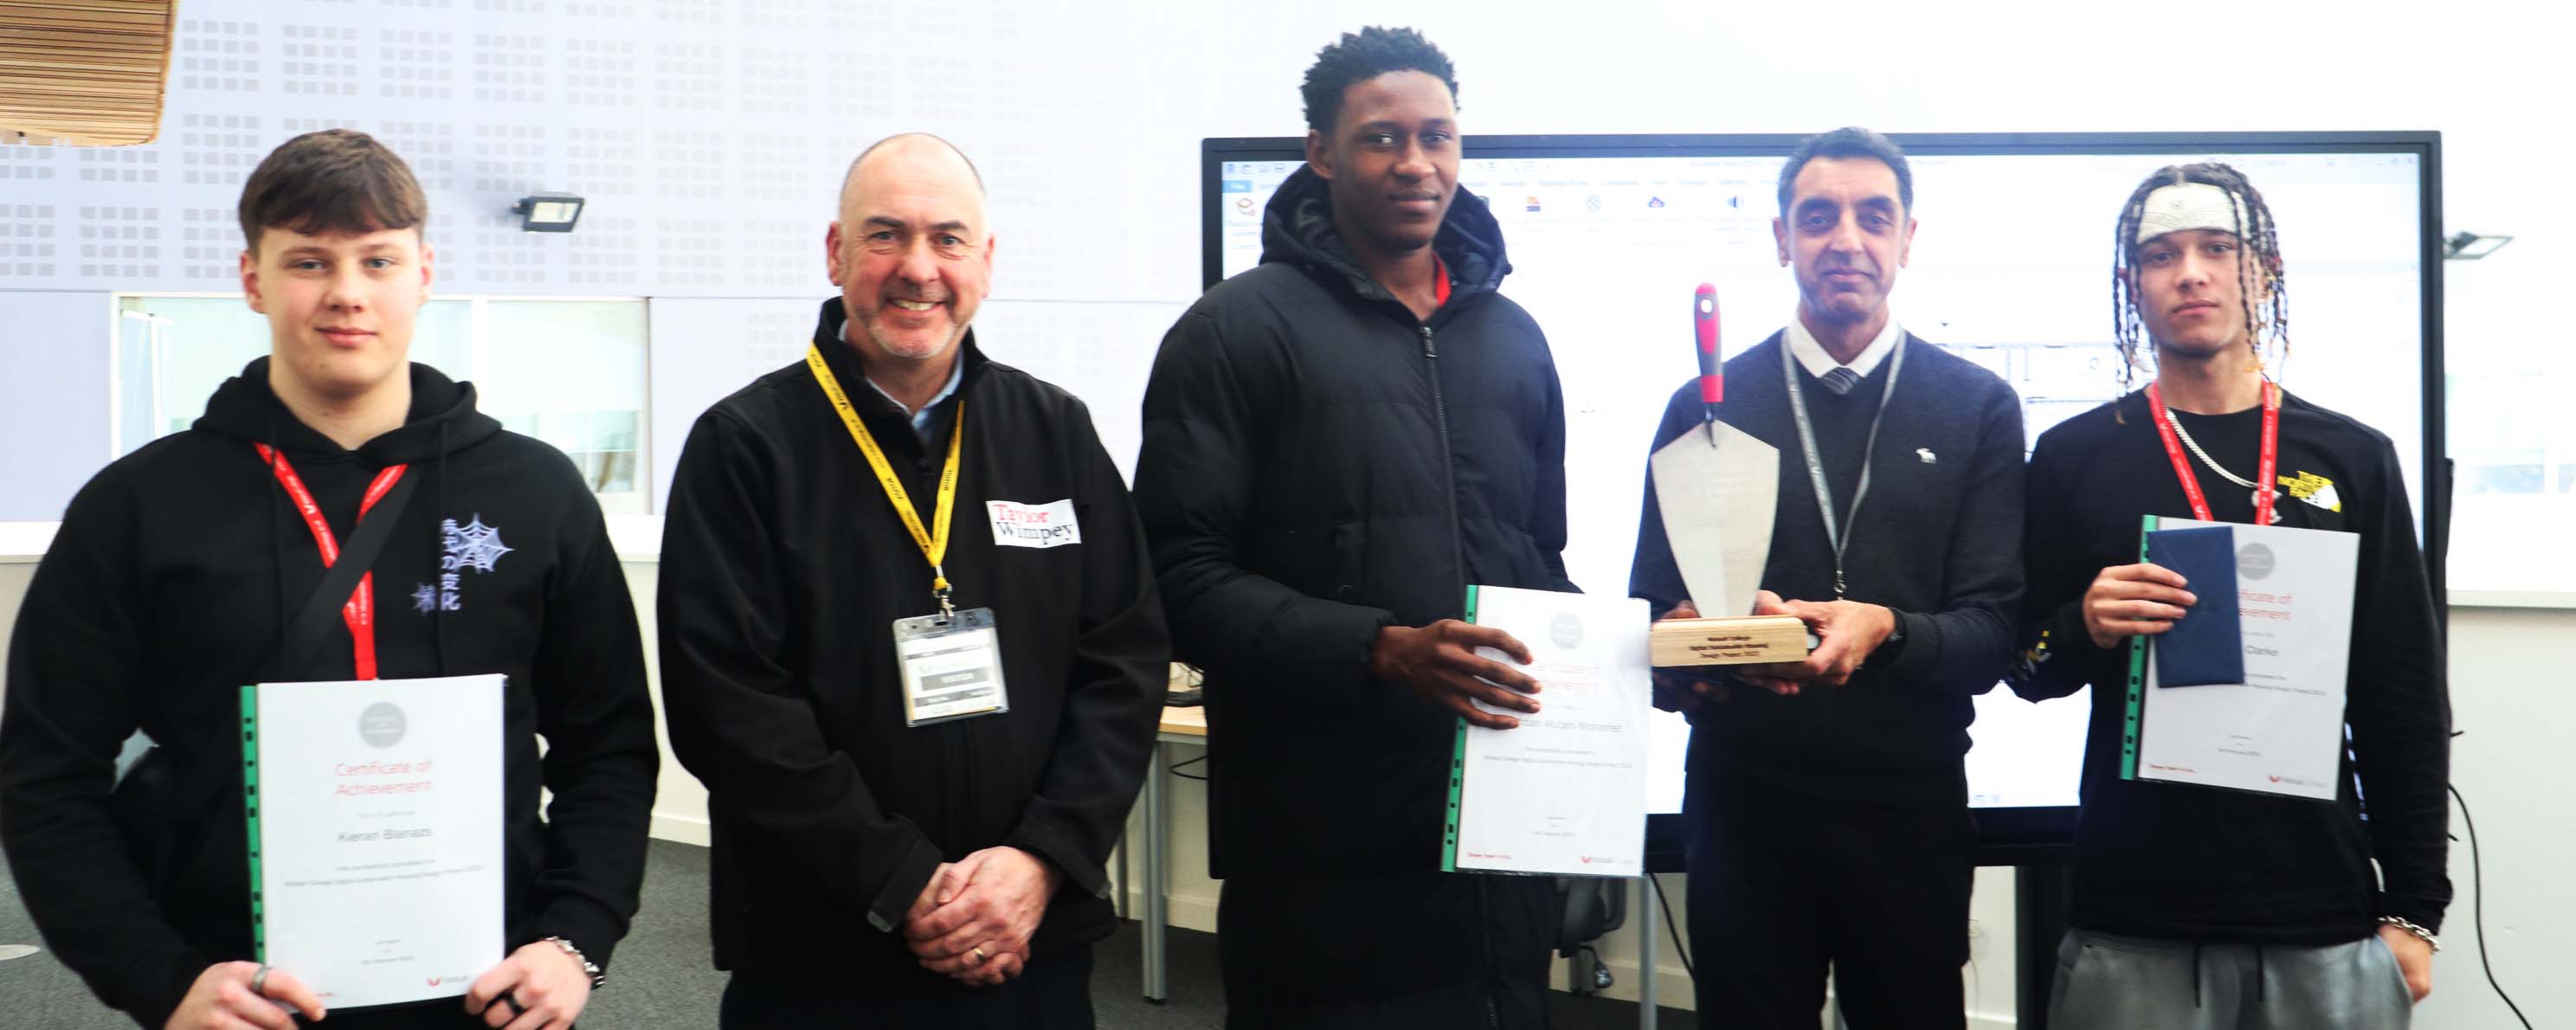 digital sustainable housing design project bricklaying student award winners facing